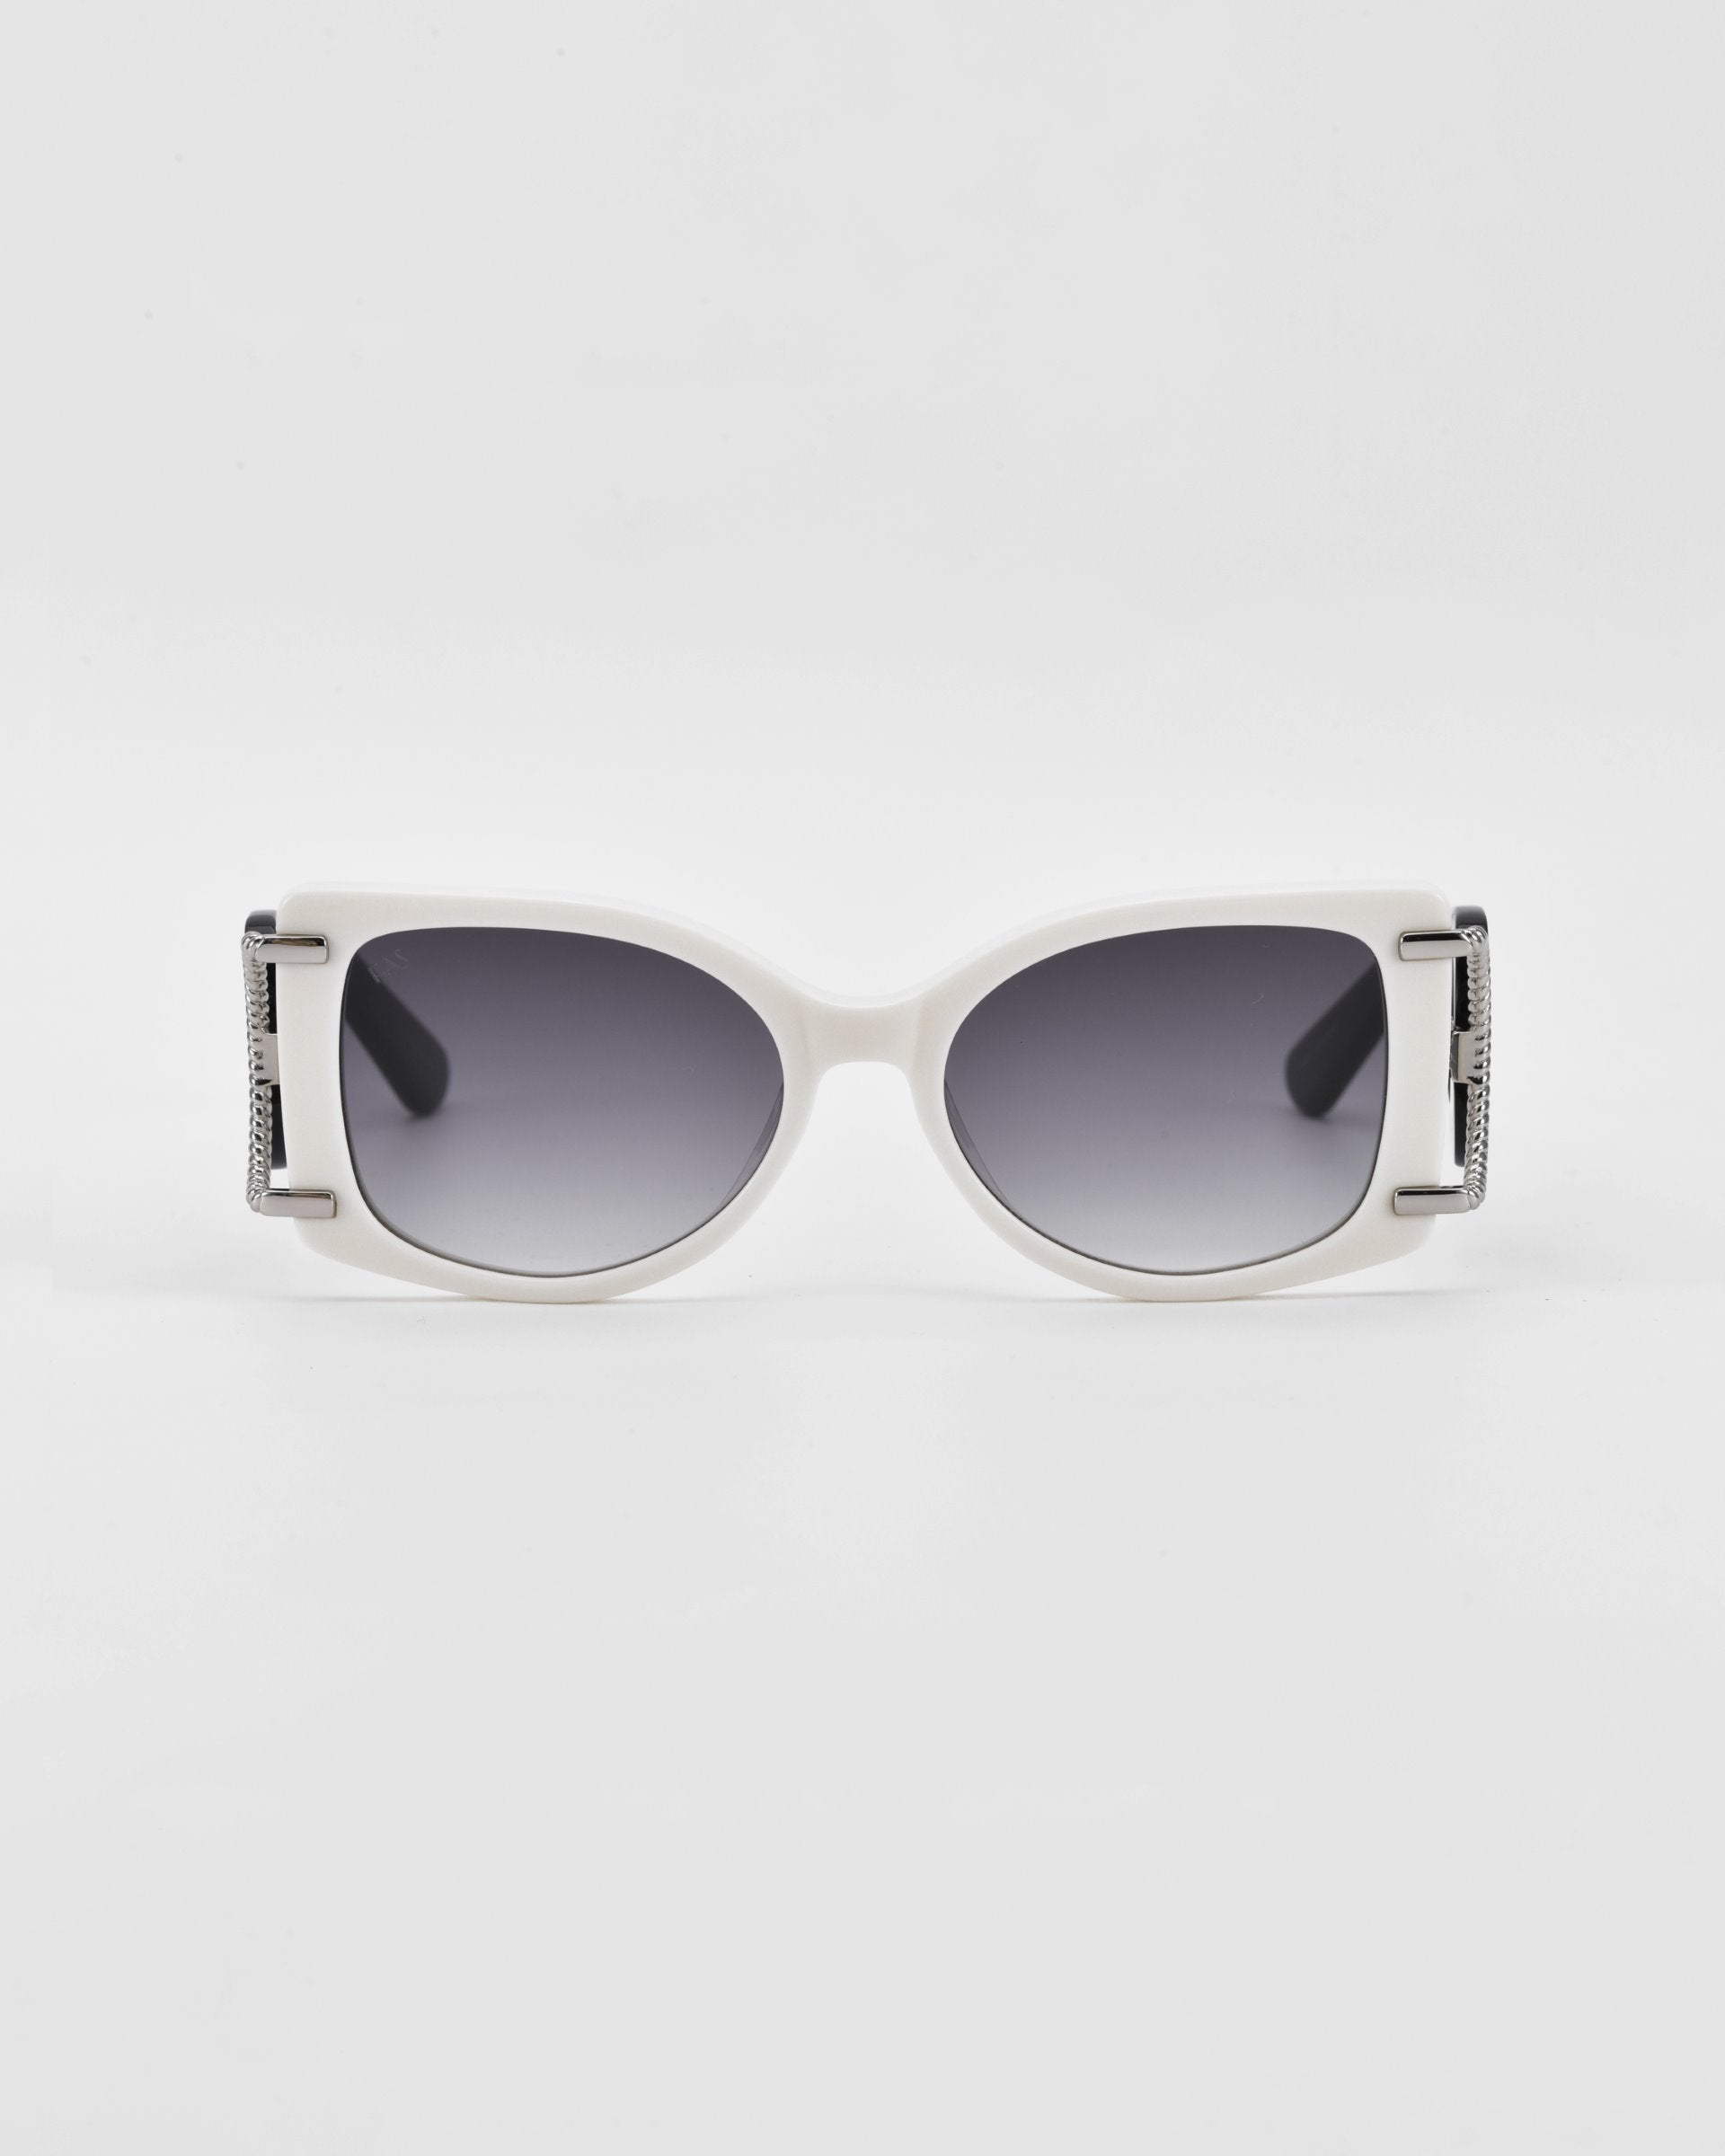 A pair of stylish acetate sunglasses featuring a white frame and dark-tinted lenses. The arms have 18-karat gold-plated hinge details with textured patterns, adding a touch of elegance to the overall design. These Sculpture by For Art&#39;s Sake® sunglasses offer 100% UVA &amp; UVB protection, set against a plain, white background.